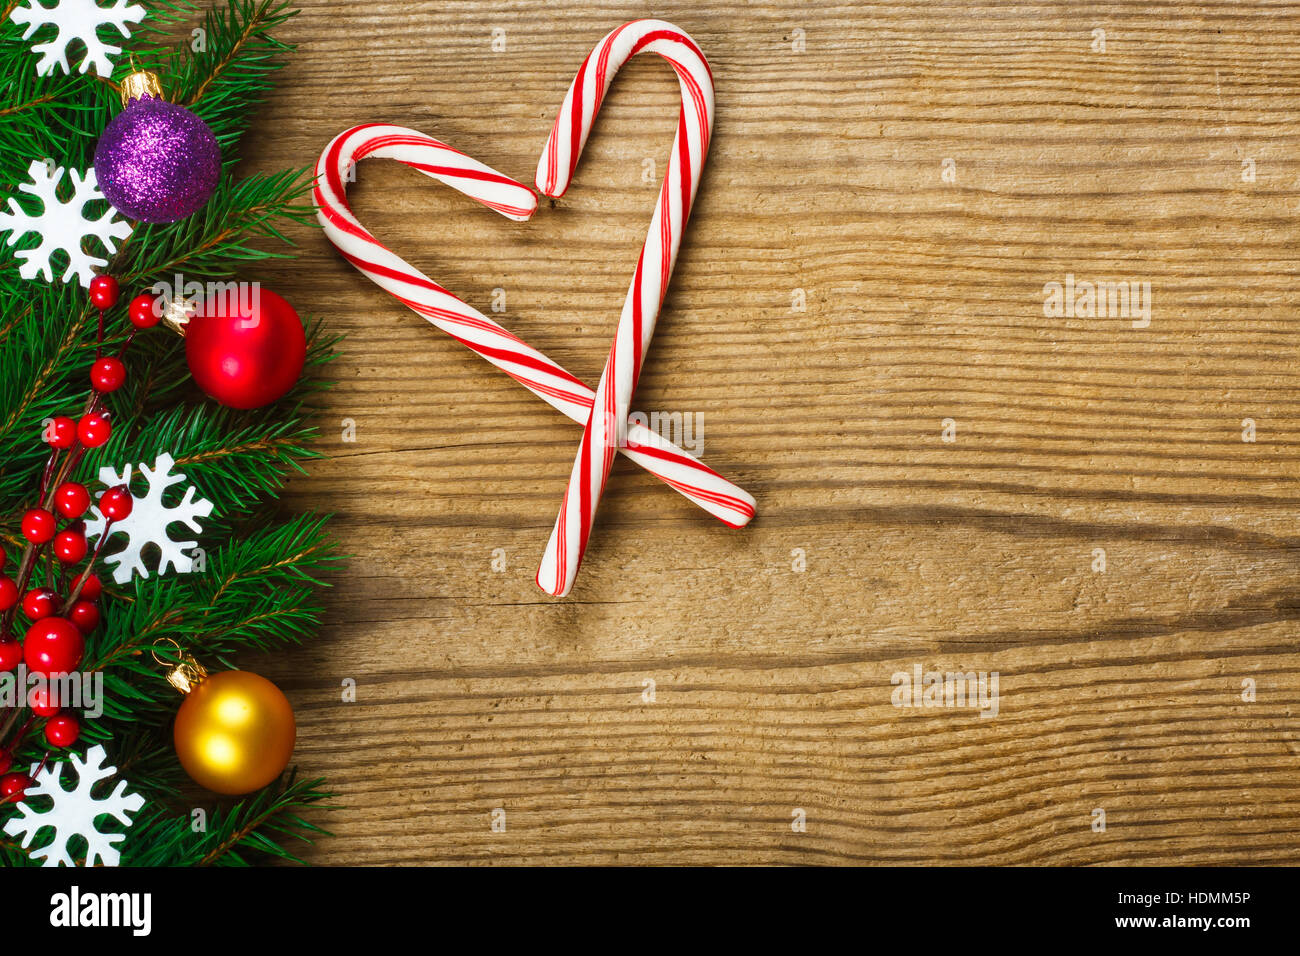 Christmas background - Christmas decorations on wooden table Stock Photo